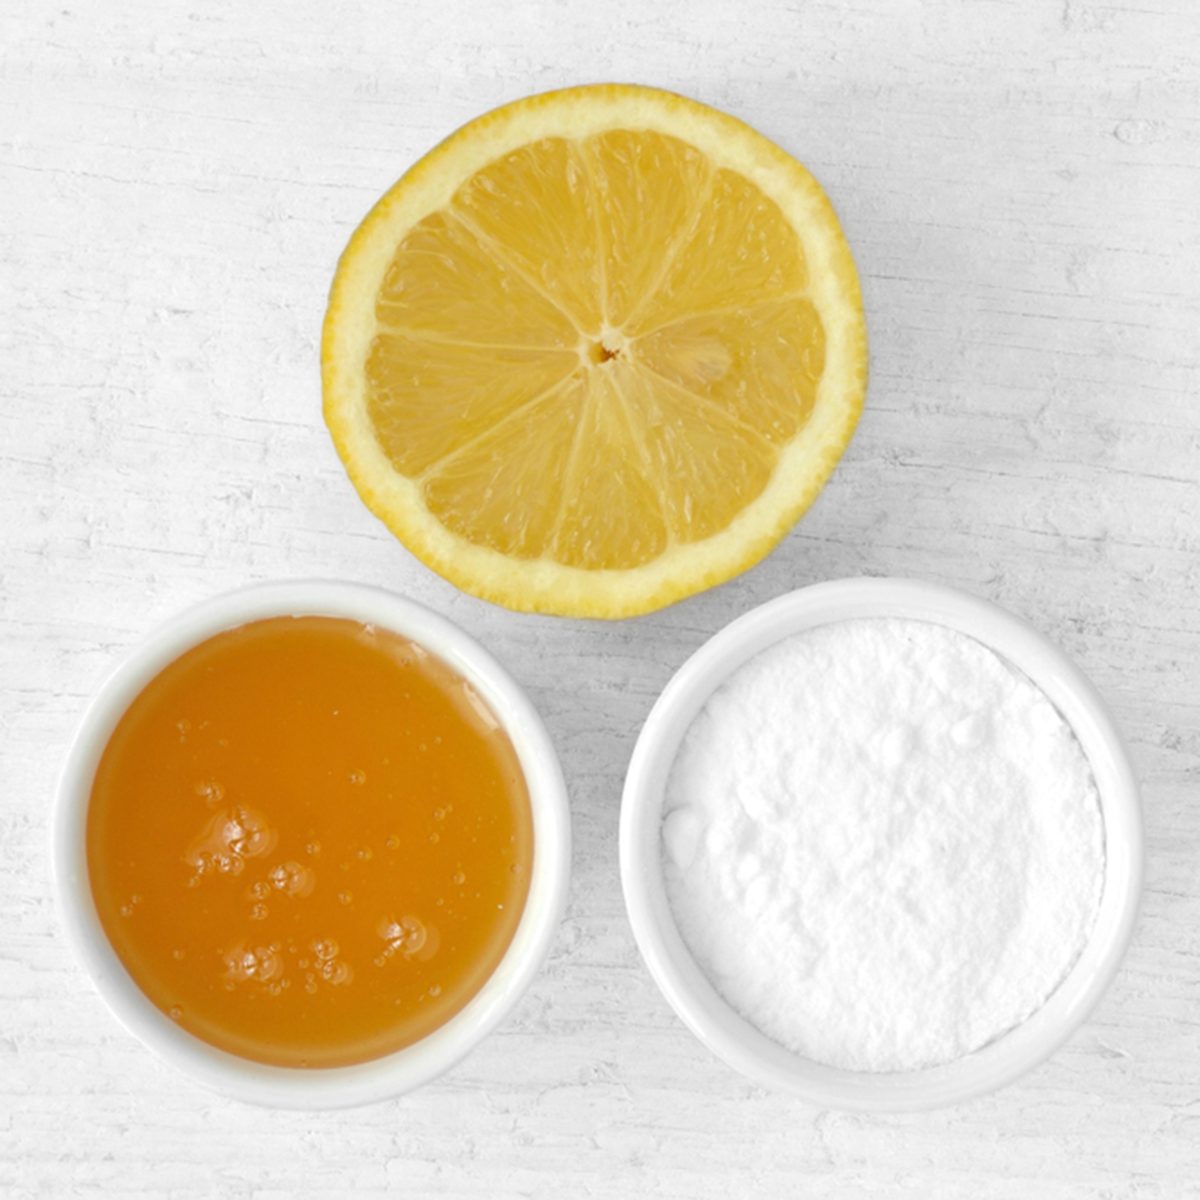 The Beauty Benefits of Baking Soda for your Skin